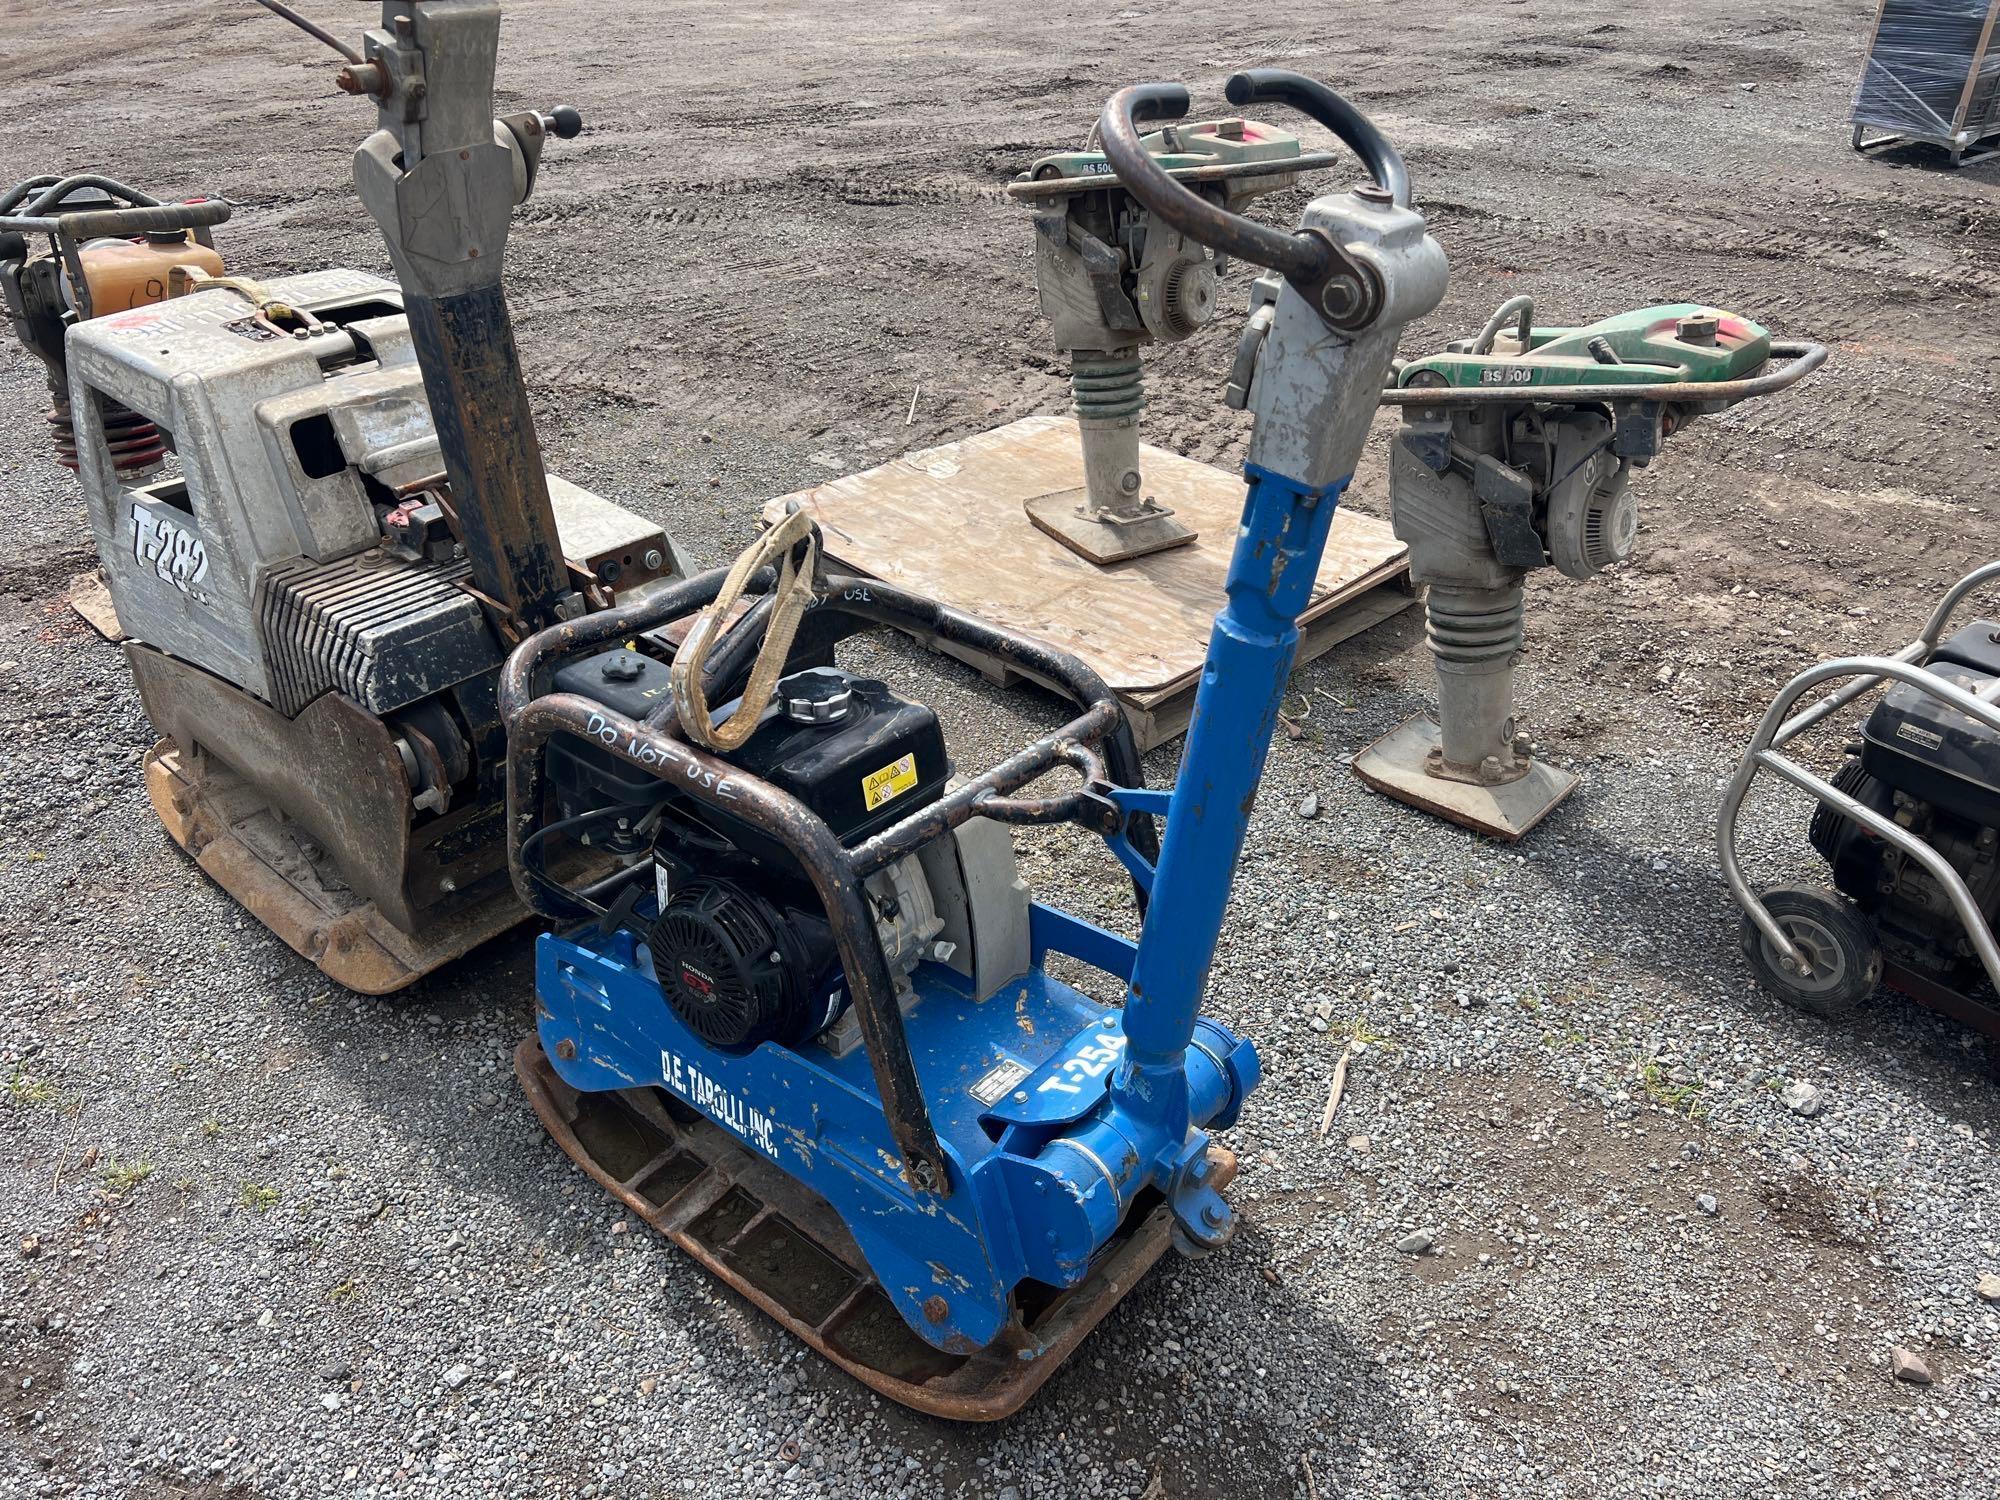 WEBER CR5HD REVERSIBLE PLATE COMPACTOR SUPPORT EQUIPMENT SN:4031-92 powered by Honda gas engine.